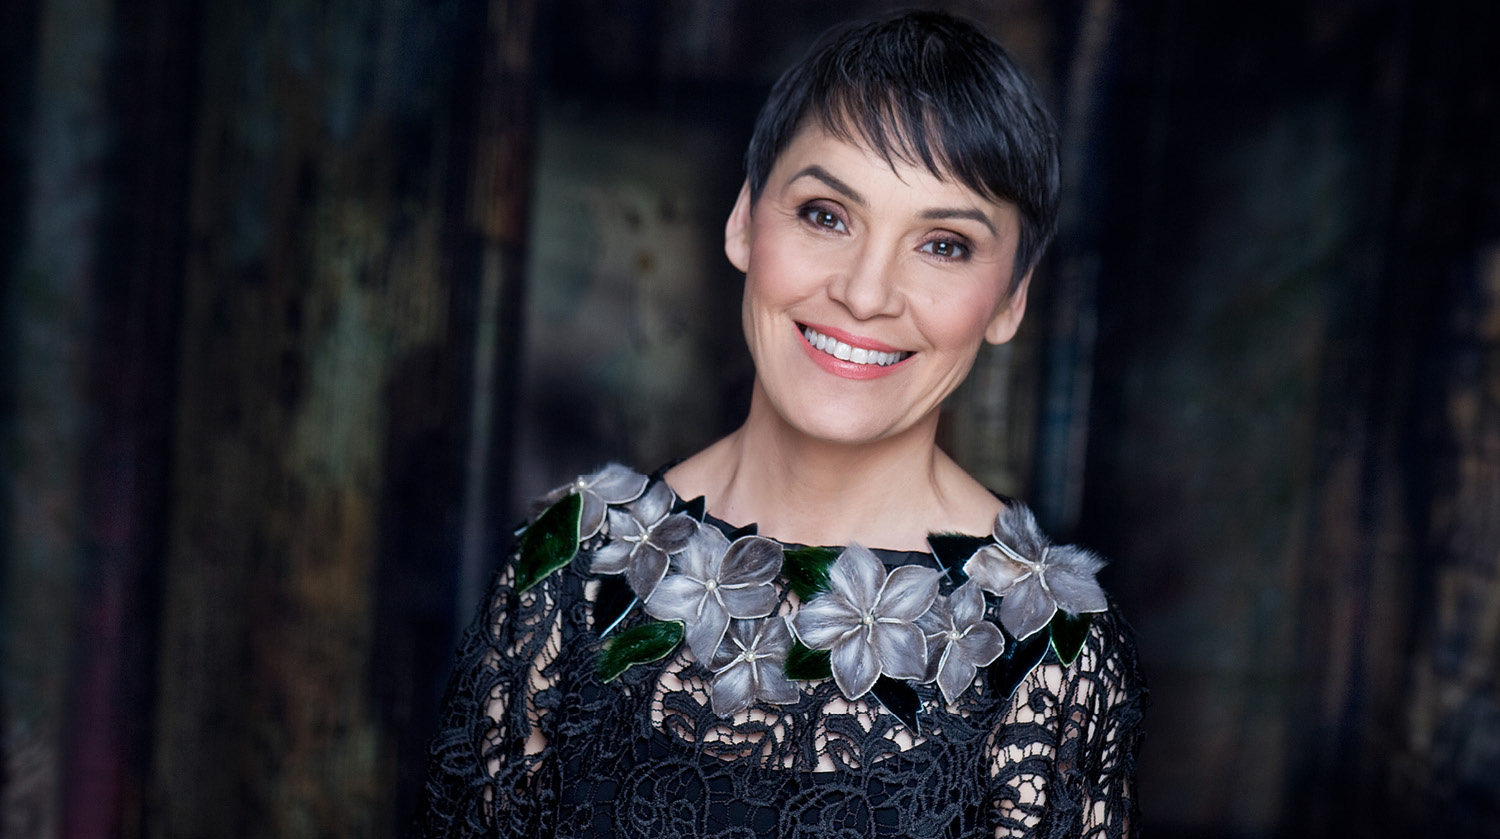 Image of Inuk singer Susan Aglukark smiling, wearing a black lace dress with grey flowers around the neckline. She has light skin, brown eyes, and short pixie cut black hair. 